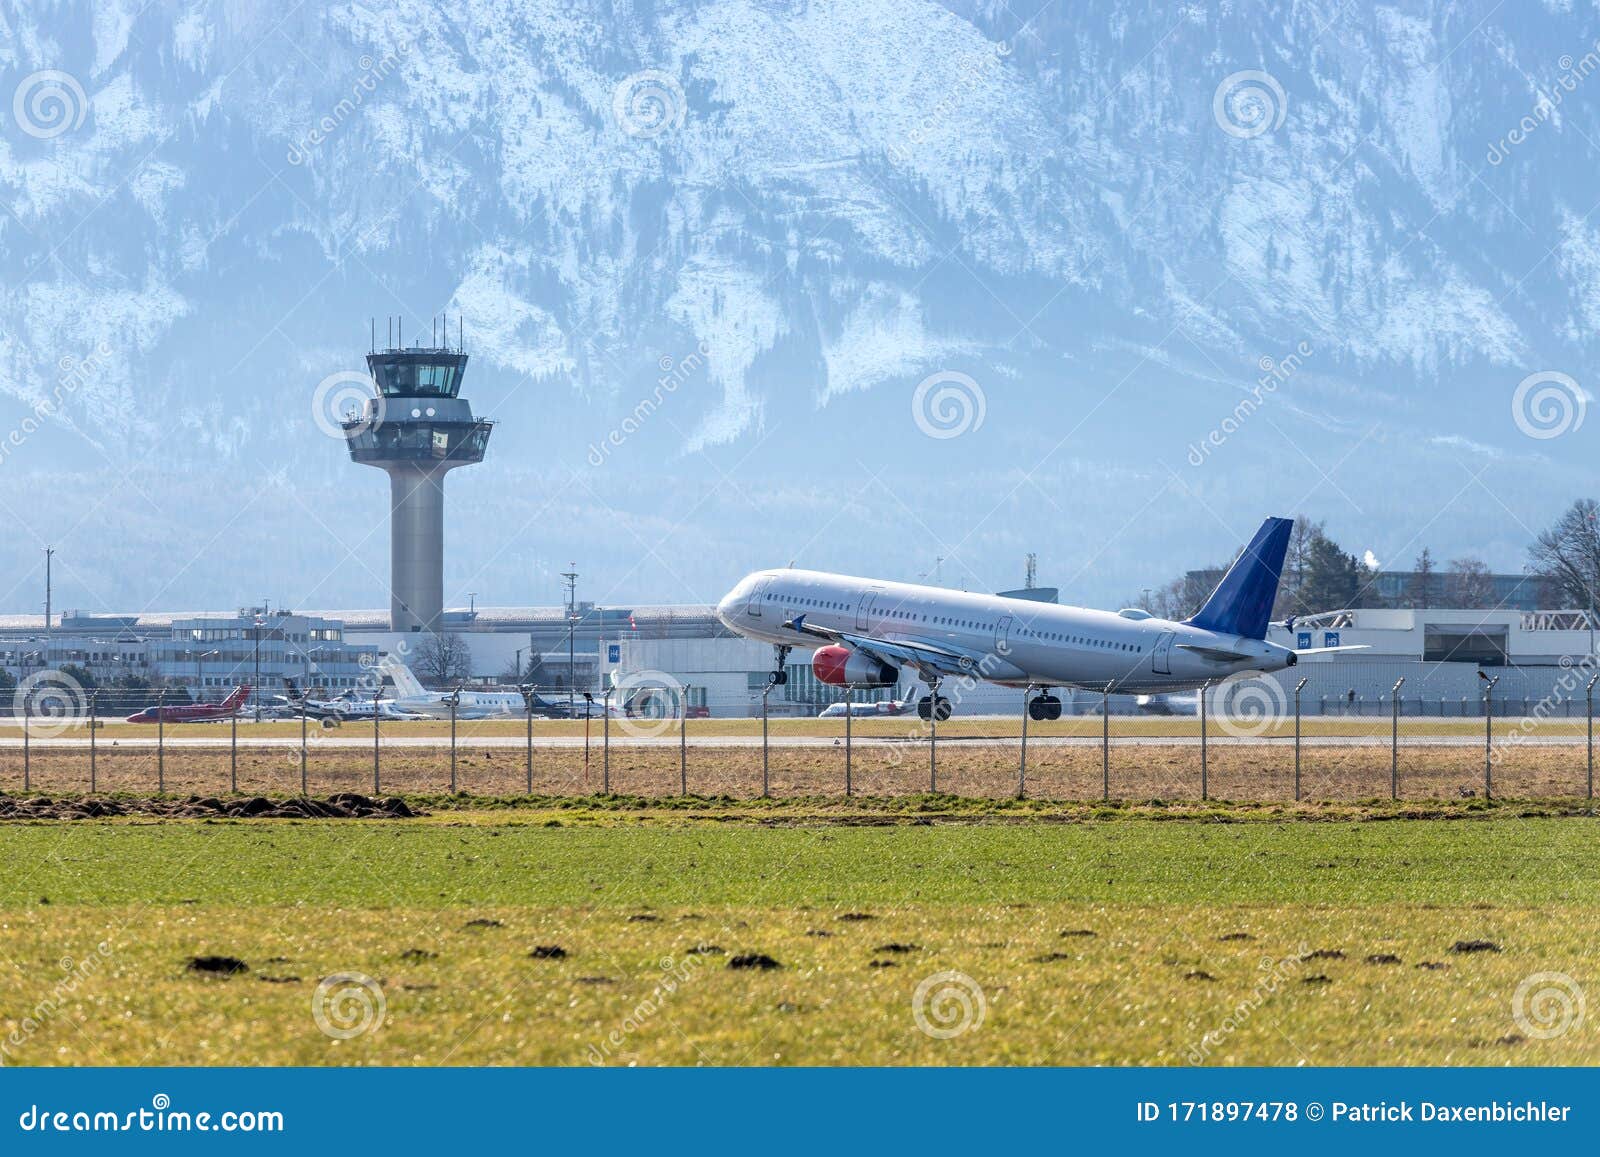 airplane arrival at the airport. travel by air, transportation